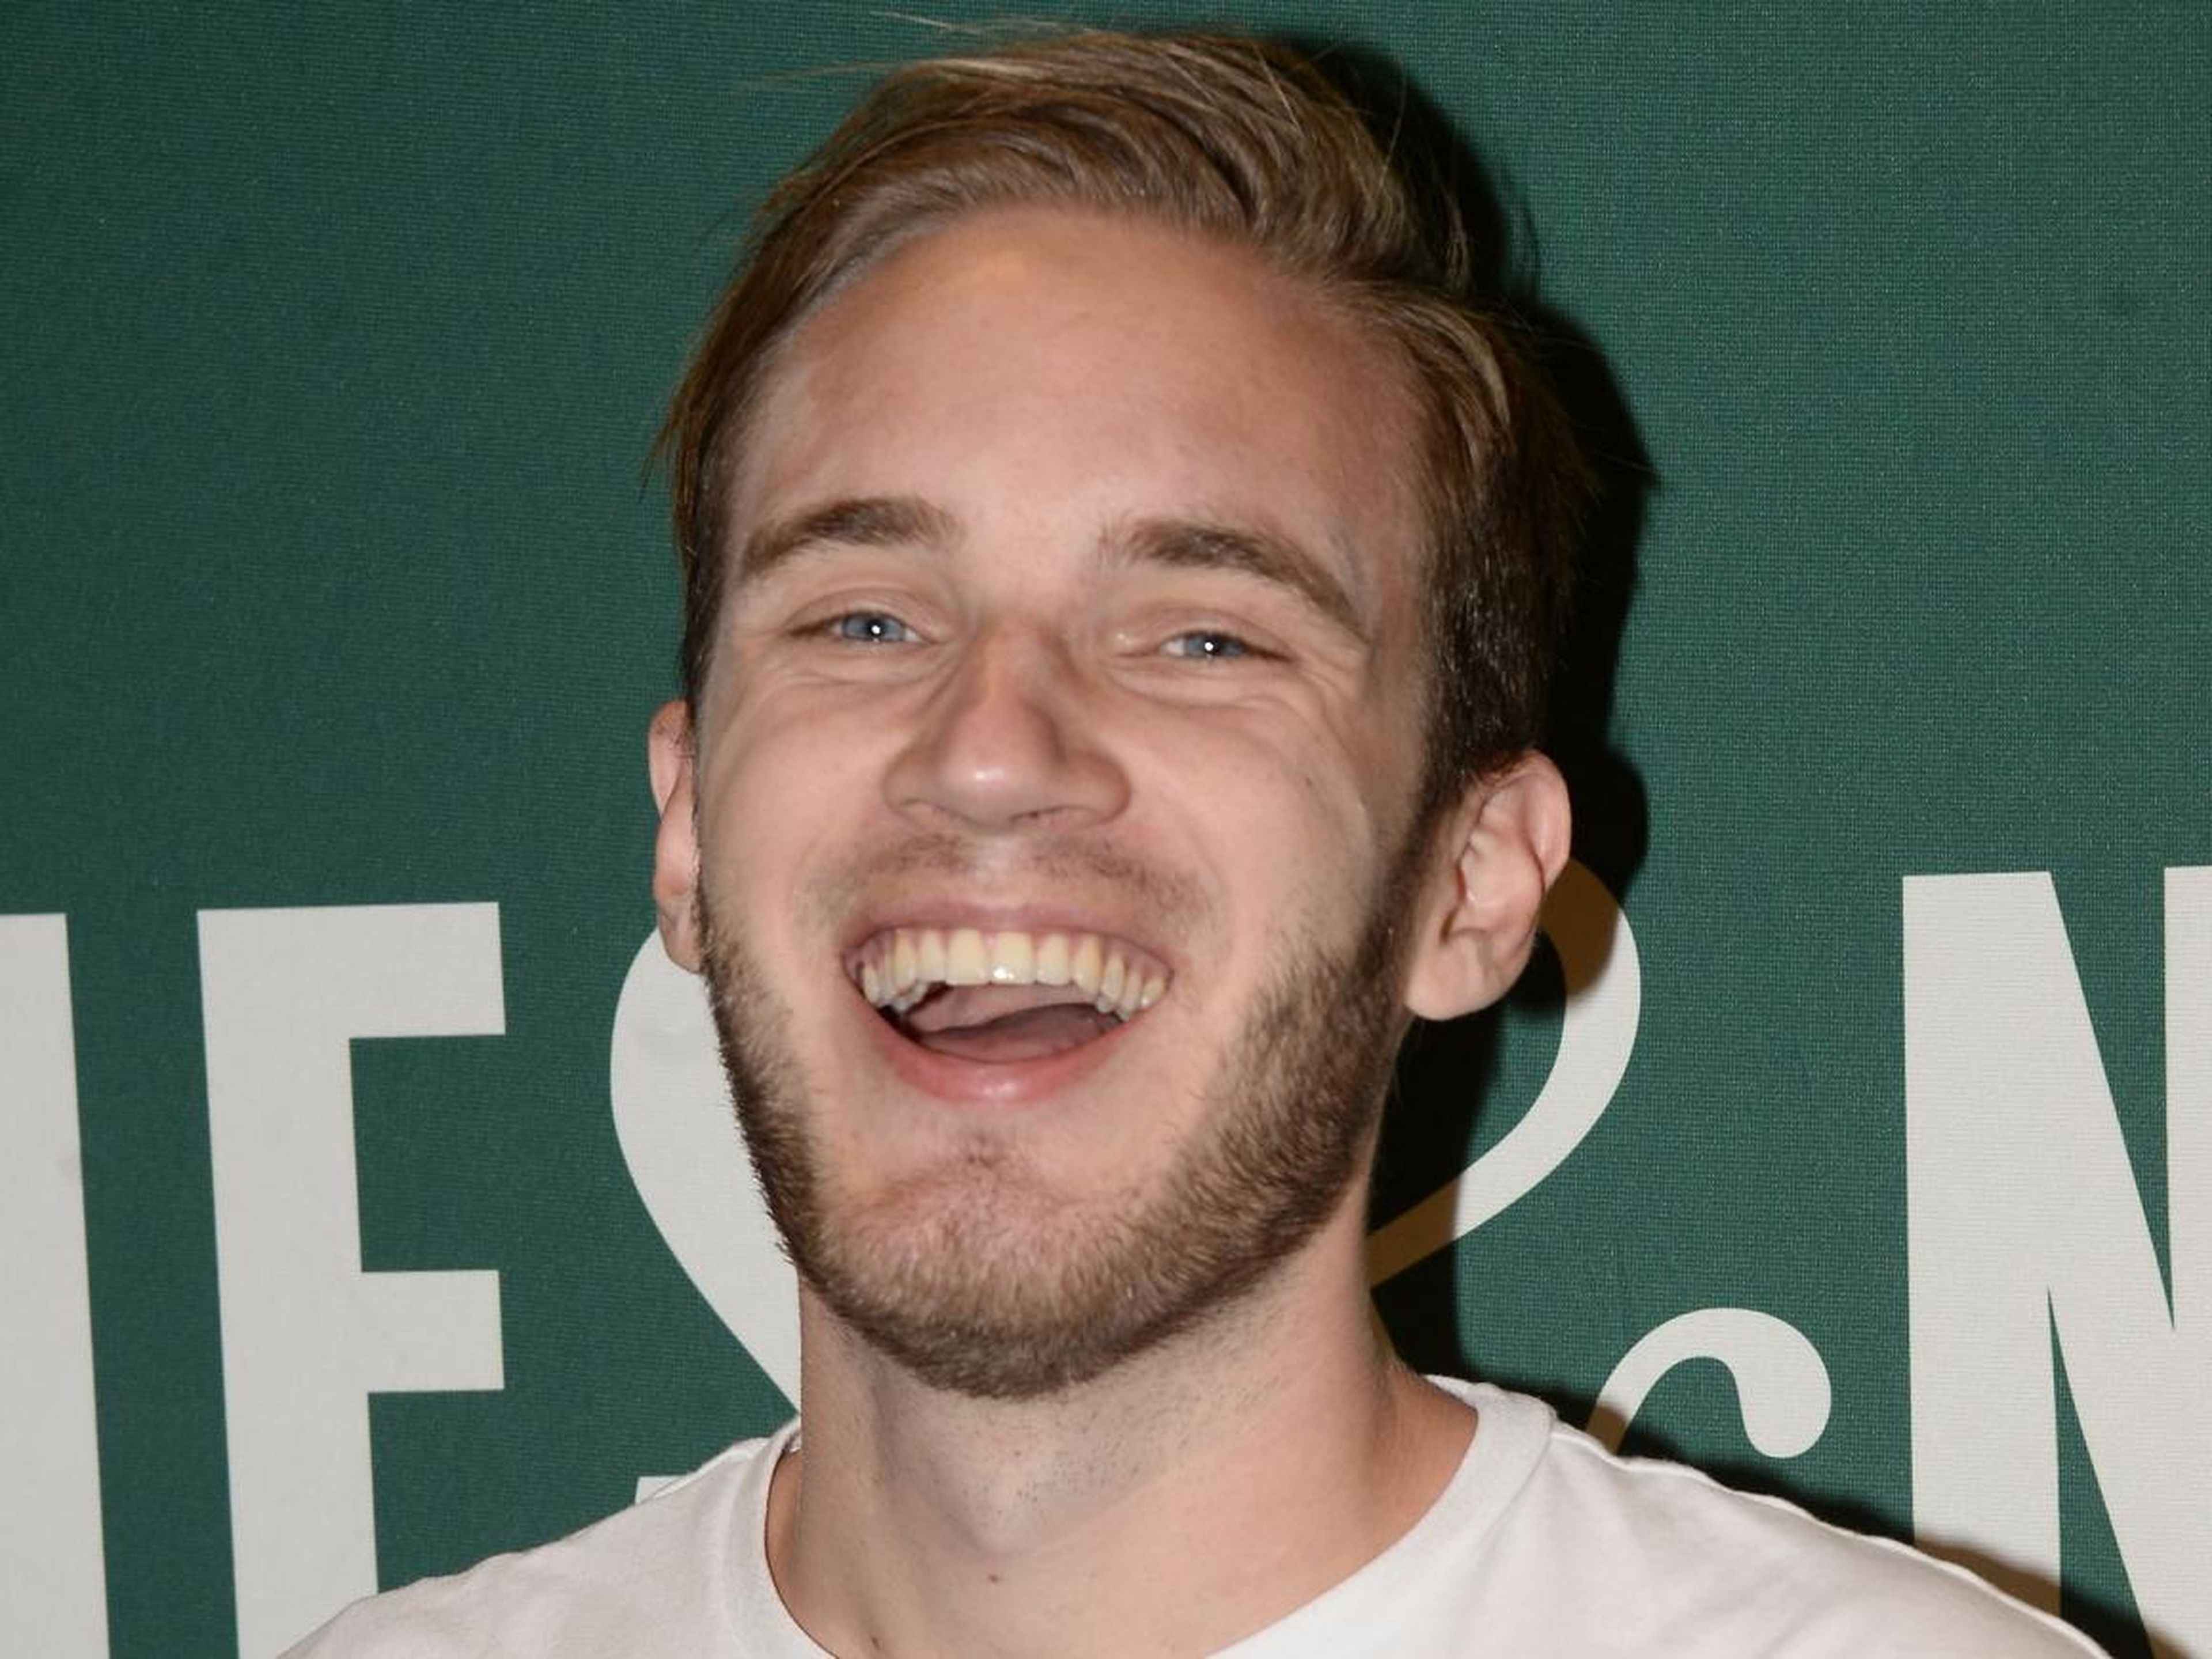 While in school, Kjellberg registered a YouTube account in 2010 under the name "PewDiePie," a combination of some words including the sound a shooting laser makes. After dropping out, Kjellberg decided to pursue a career with his